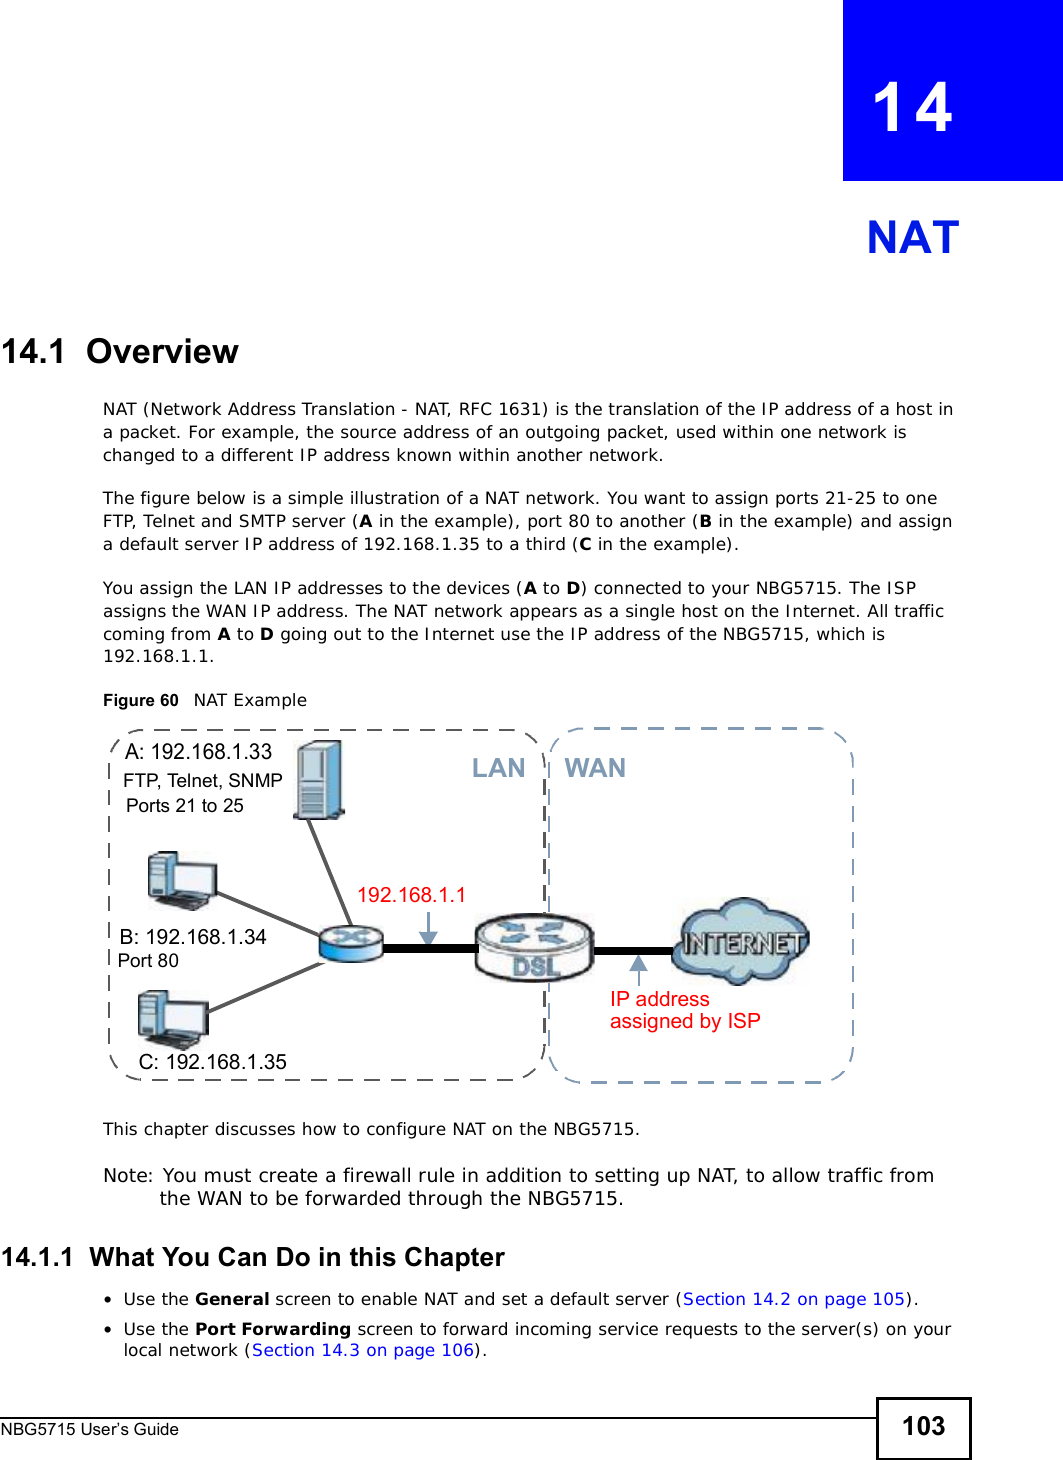 NBG5715 User’s Guide 103CHAPTER   14NAT14.1  OverviewNAT (Network Address Translation - NAT, RFC 1631) is the translation of the IP address of a host in a packet. For example, the source address of an outgoing packet, used within one network is changed to a different IP address known within another network.The figure below is a simple illustration of a NAT network. You want to assign ports 21-25 to one FTP, Telnet and SMTP server (A in the example), port 80 to another (B in the example) and assign a default server IP address of 192.168.1.35 to a third (C in the example). You assign the LAN IP addresses to the devices (A to D) connected to your NBG5715. The ISP assigns the WAN IP address. The NAT network appears as a single host on the Internet. All traffic coming from A to D going out to the Internet use the IP address of the NBG5715, which is 192.168.1.1.Figure 60   NAT ExampleThis chapter discusses how to configure NAT on the NBG5715.Note: You must create a firewall rule in addition to setting up NAT, to allow traffic from the WAN to be forwarded through the NBG5715.14.1.1  What You Can Do in this Chapter•Use the General screen to enable NAT and set a default server (Section 14.2 on page 105).•Use the Port Forwarding screen to forward incoming service requests to the server(s) on your local network (Section 14.3 on page 106).A: 192.168.1.33B: 192.168.1.34C: 192.168.1.35IP address 192.168.1.1WANLANassigned by ISPFTP, Telnet, SNMPPort 80Ports 21 to 25